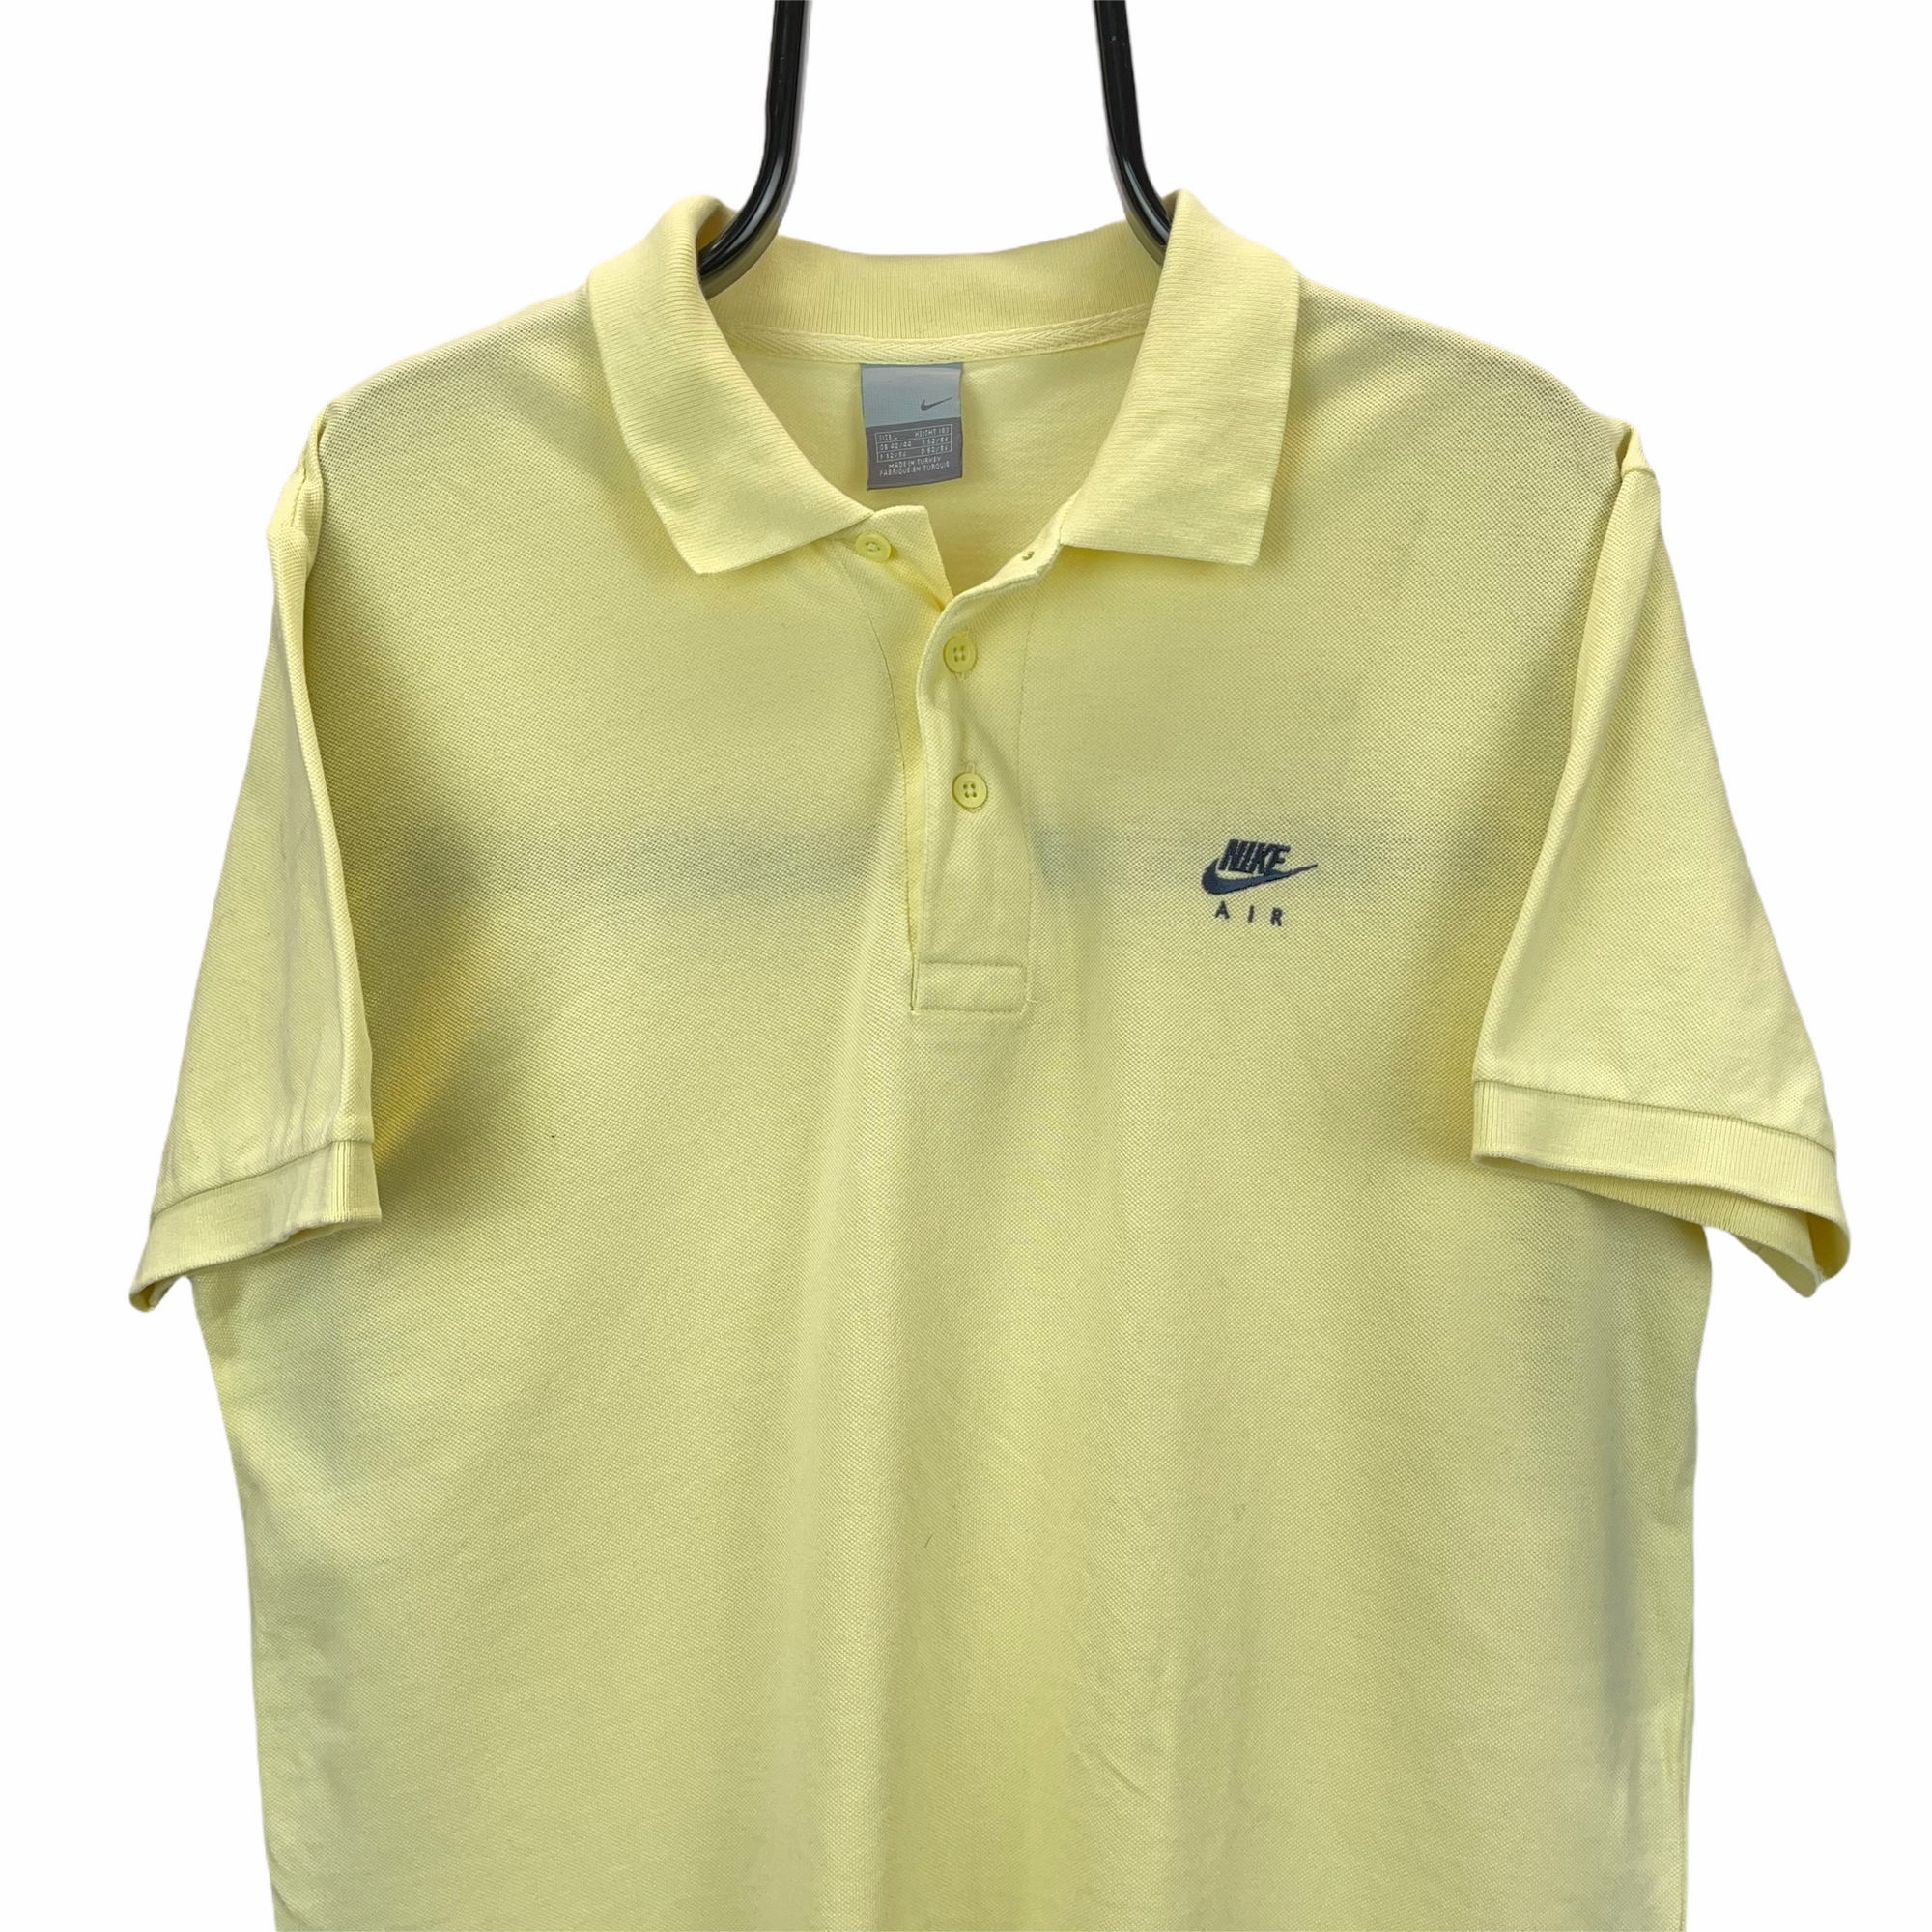 VINTAGE NIKE EMBROIDERED SMALL LOGO POLO SHIRT IN LEMON YELLOW - MEN'S LARGE/WOMEN'S XL